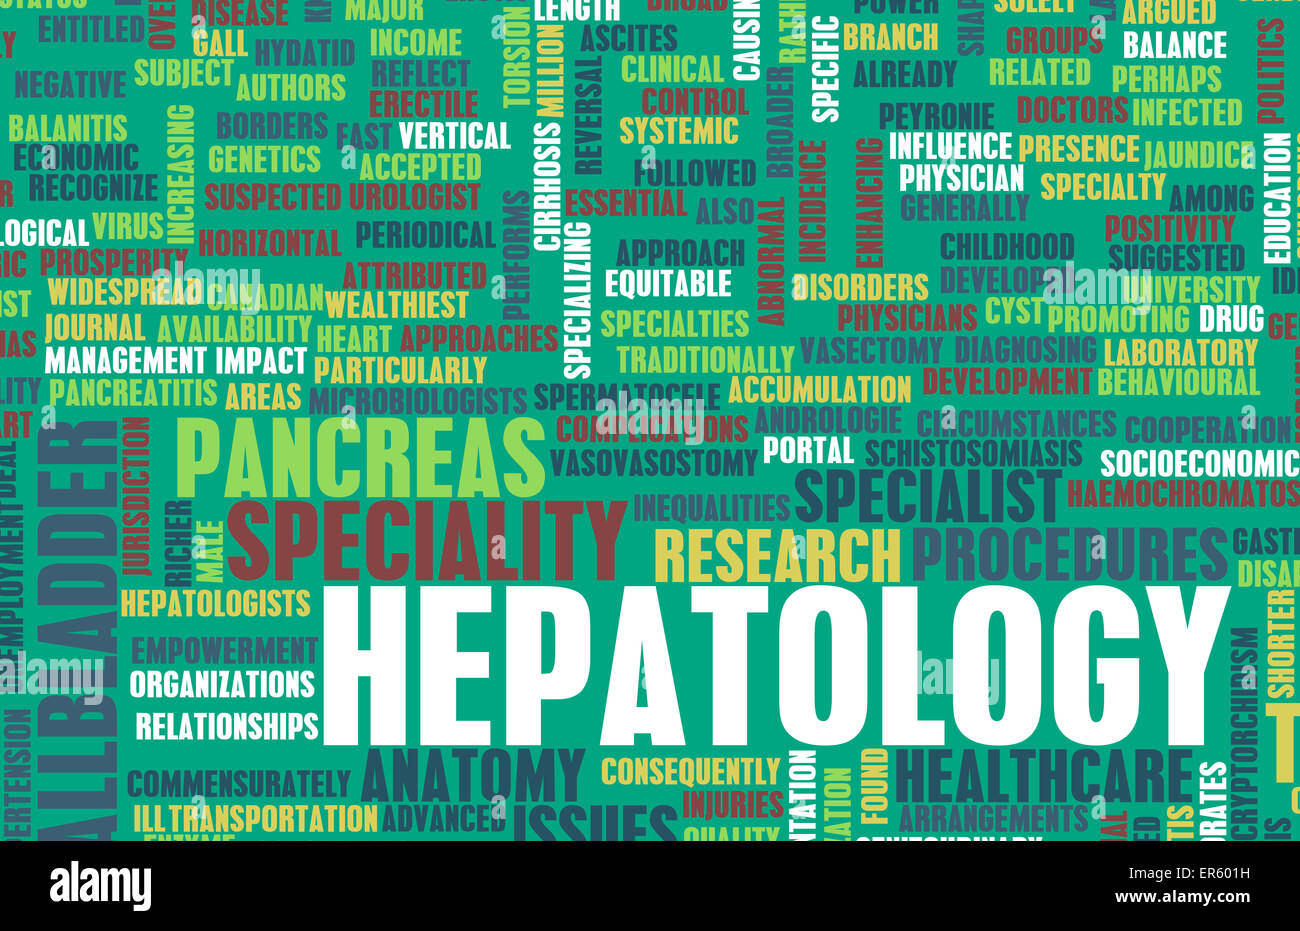 Hepatology or Hepatologist Medical Field Specialty As Art Stock Photo